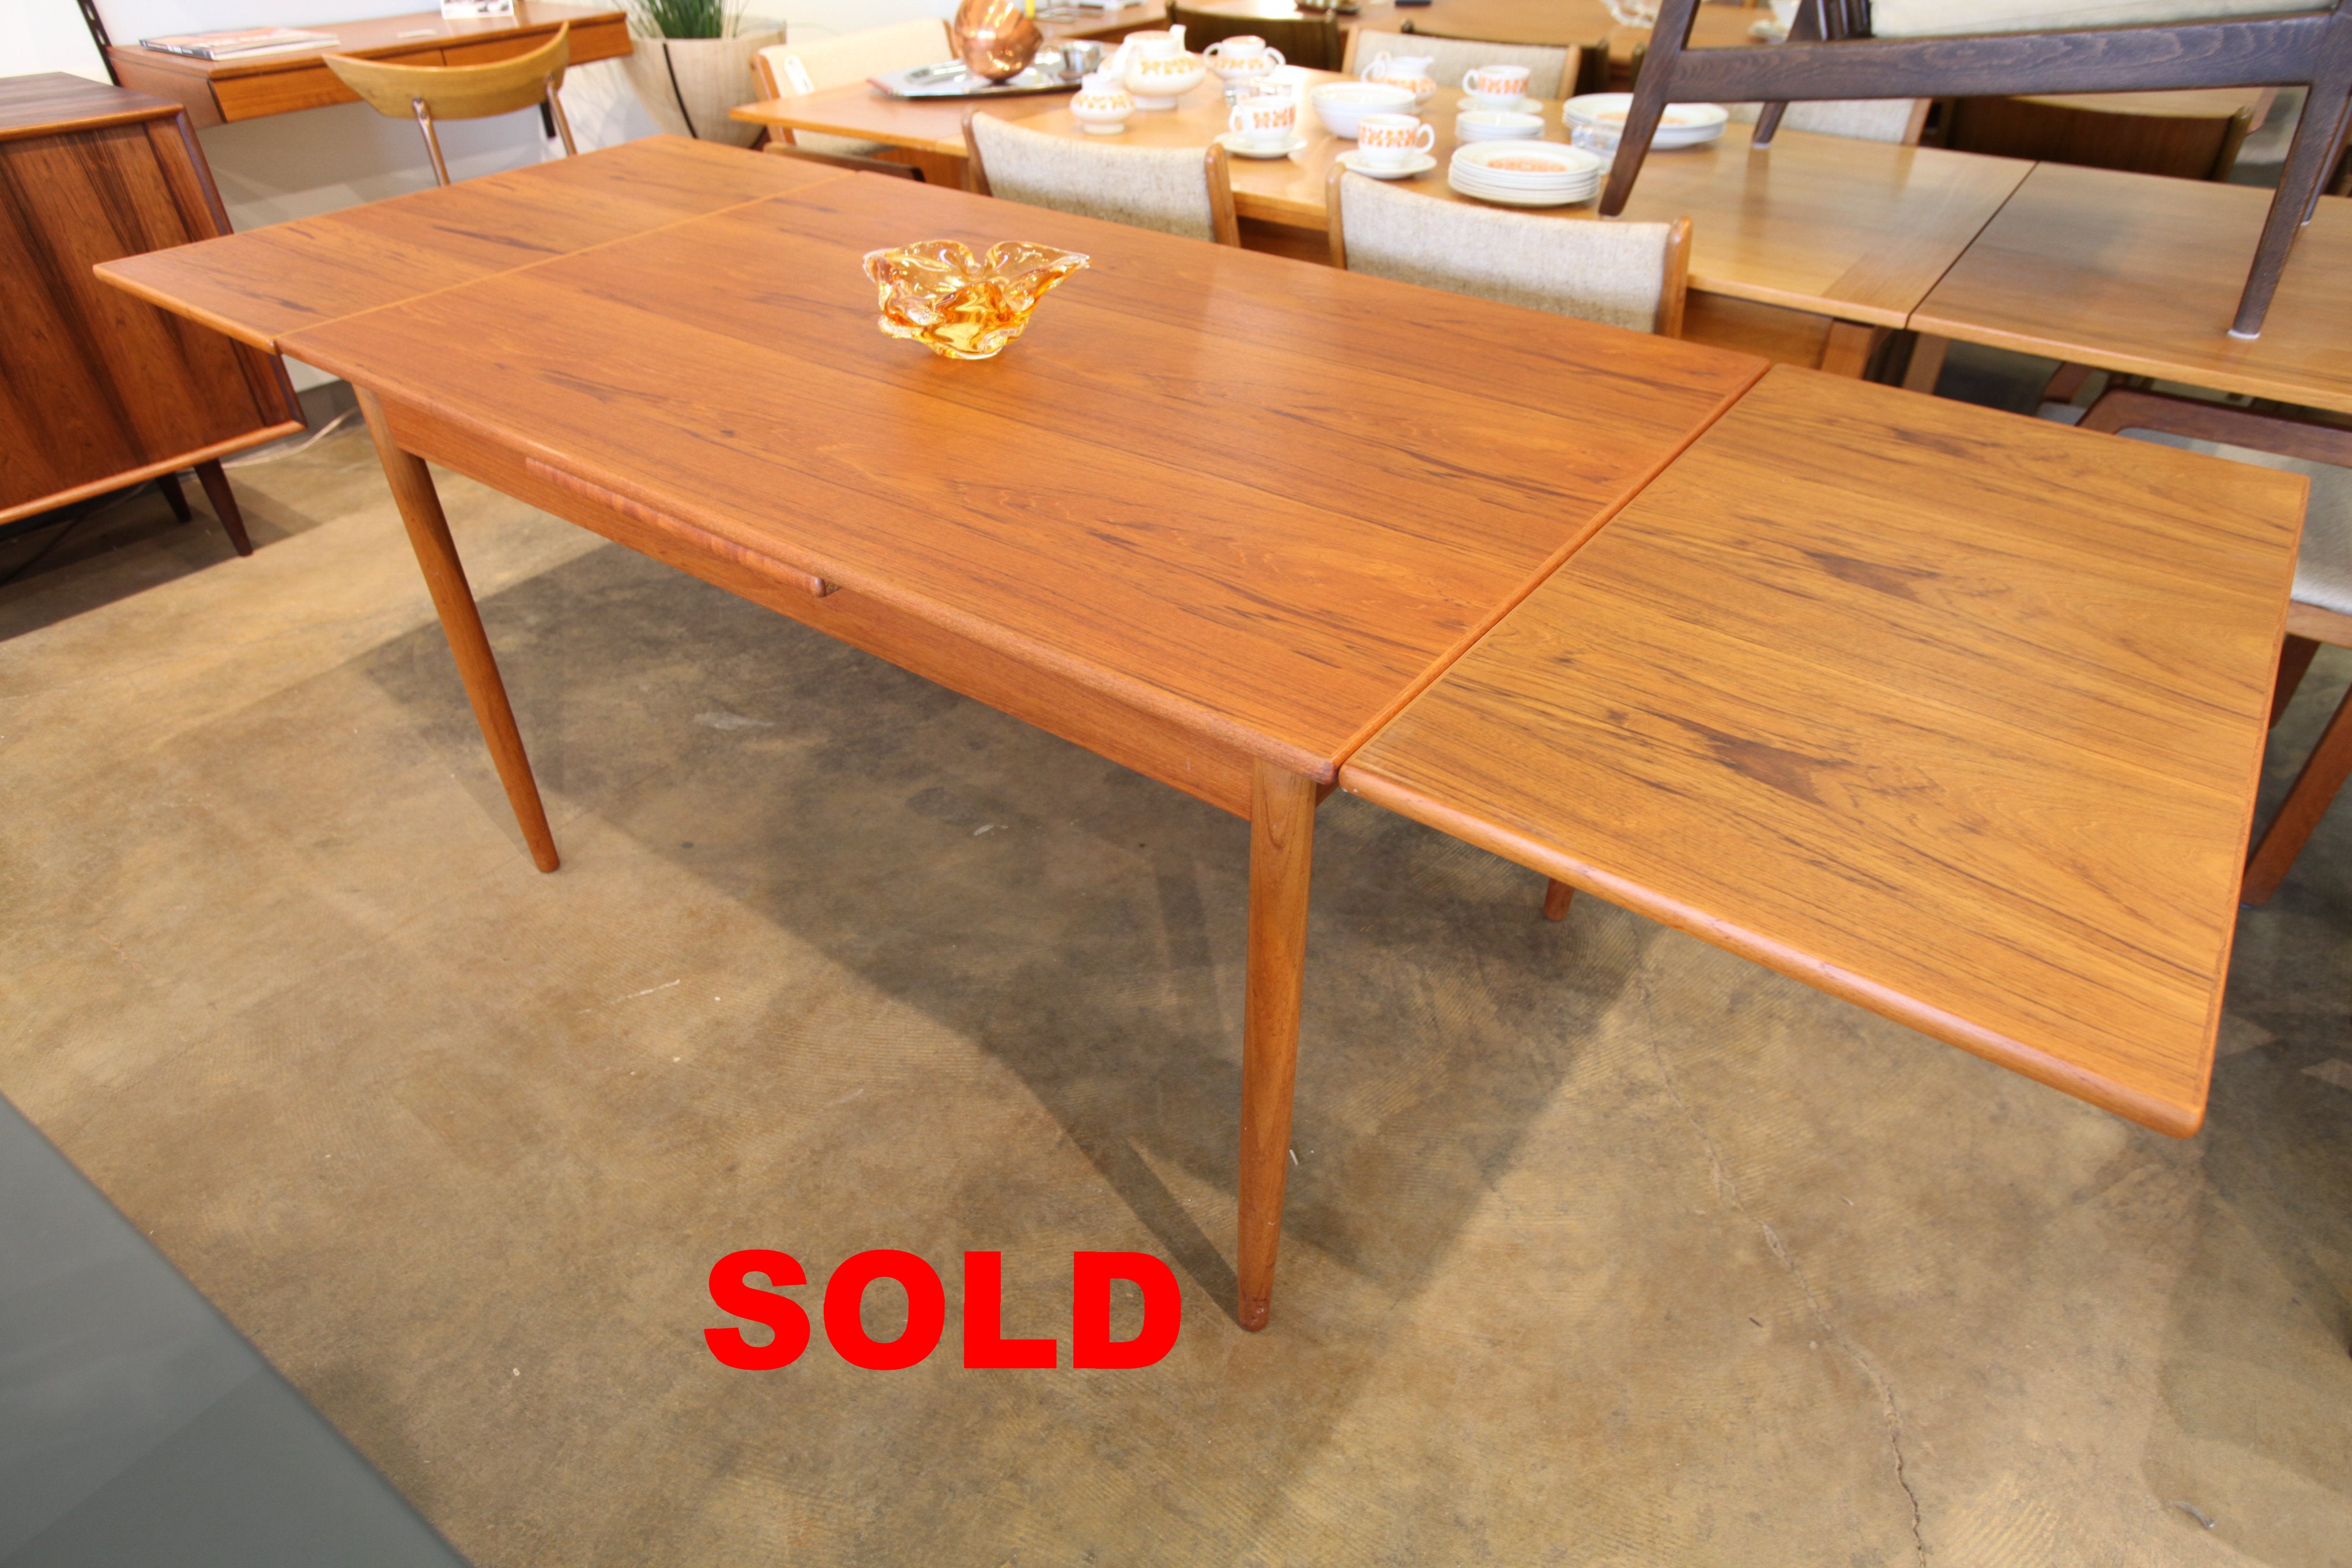 Vintage Danish Teak Dining Table w/ Pullout Extensions (86.75"x33.5")(51.25"x33.5") 29"H